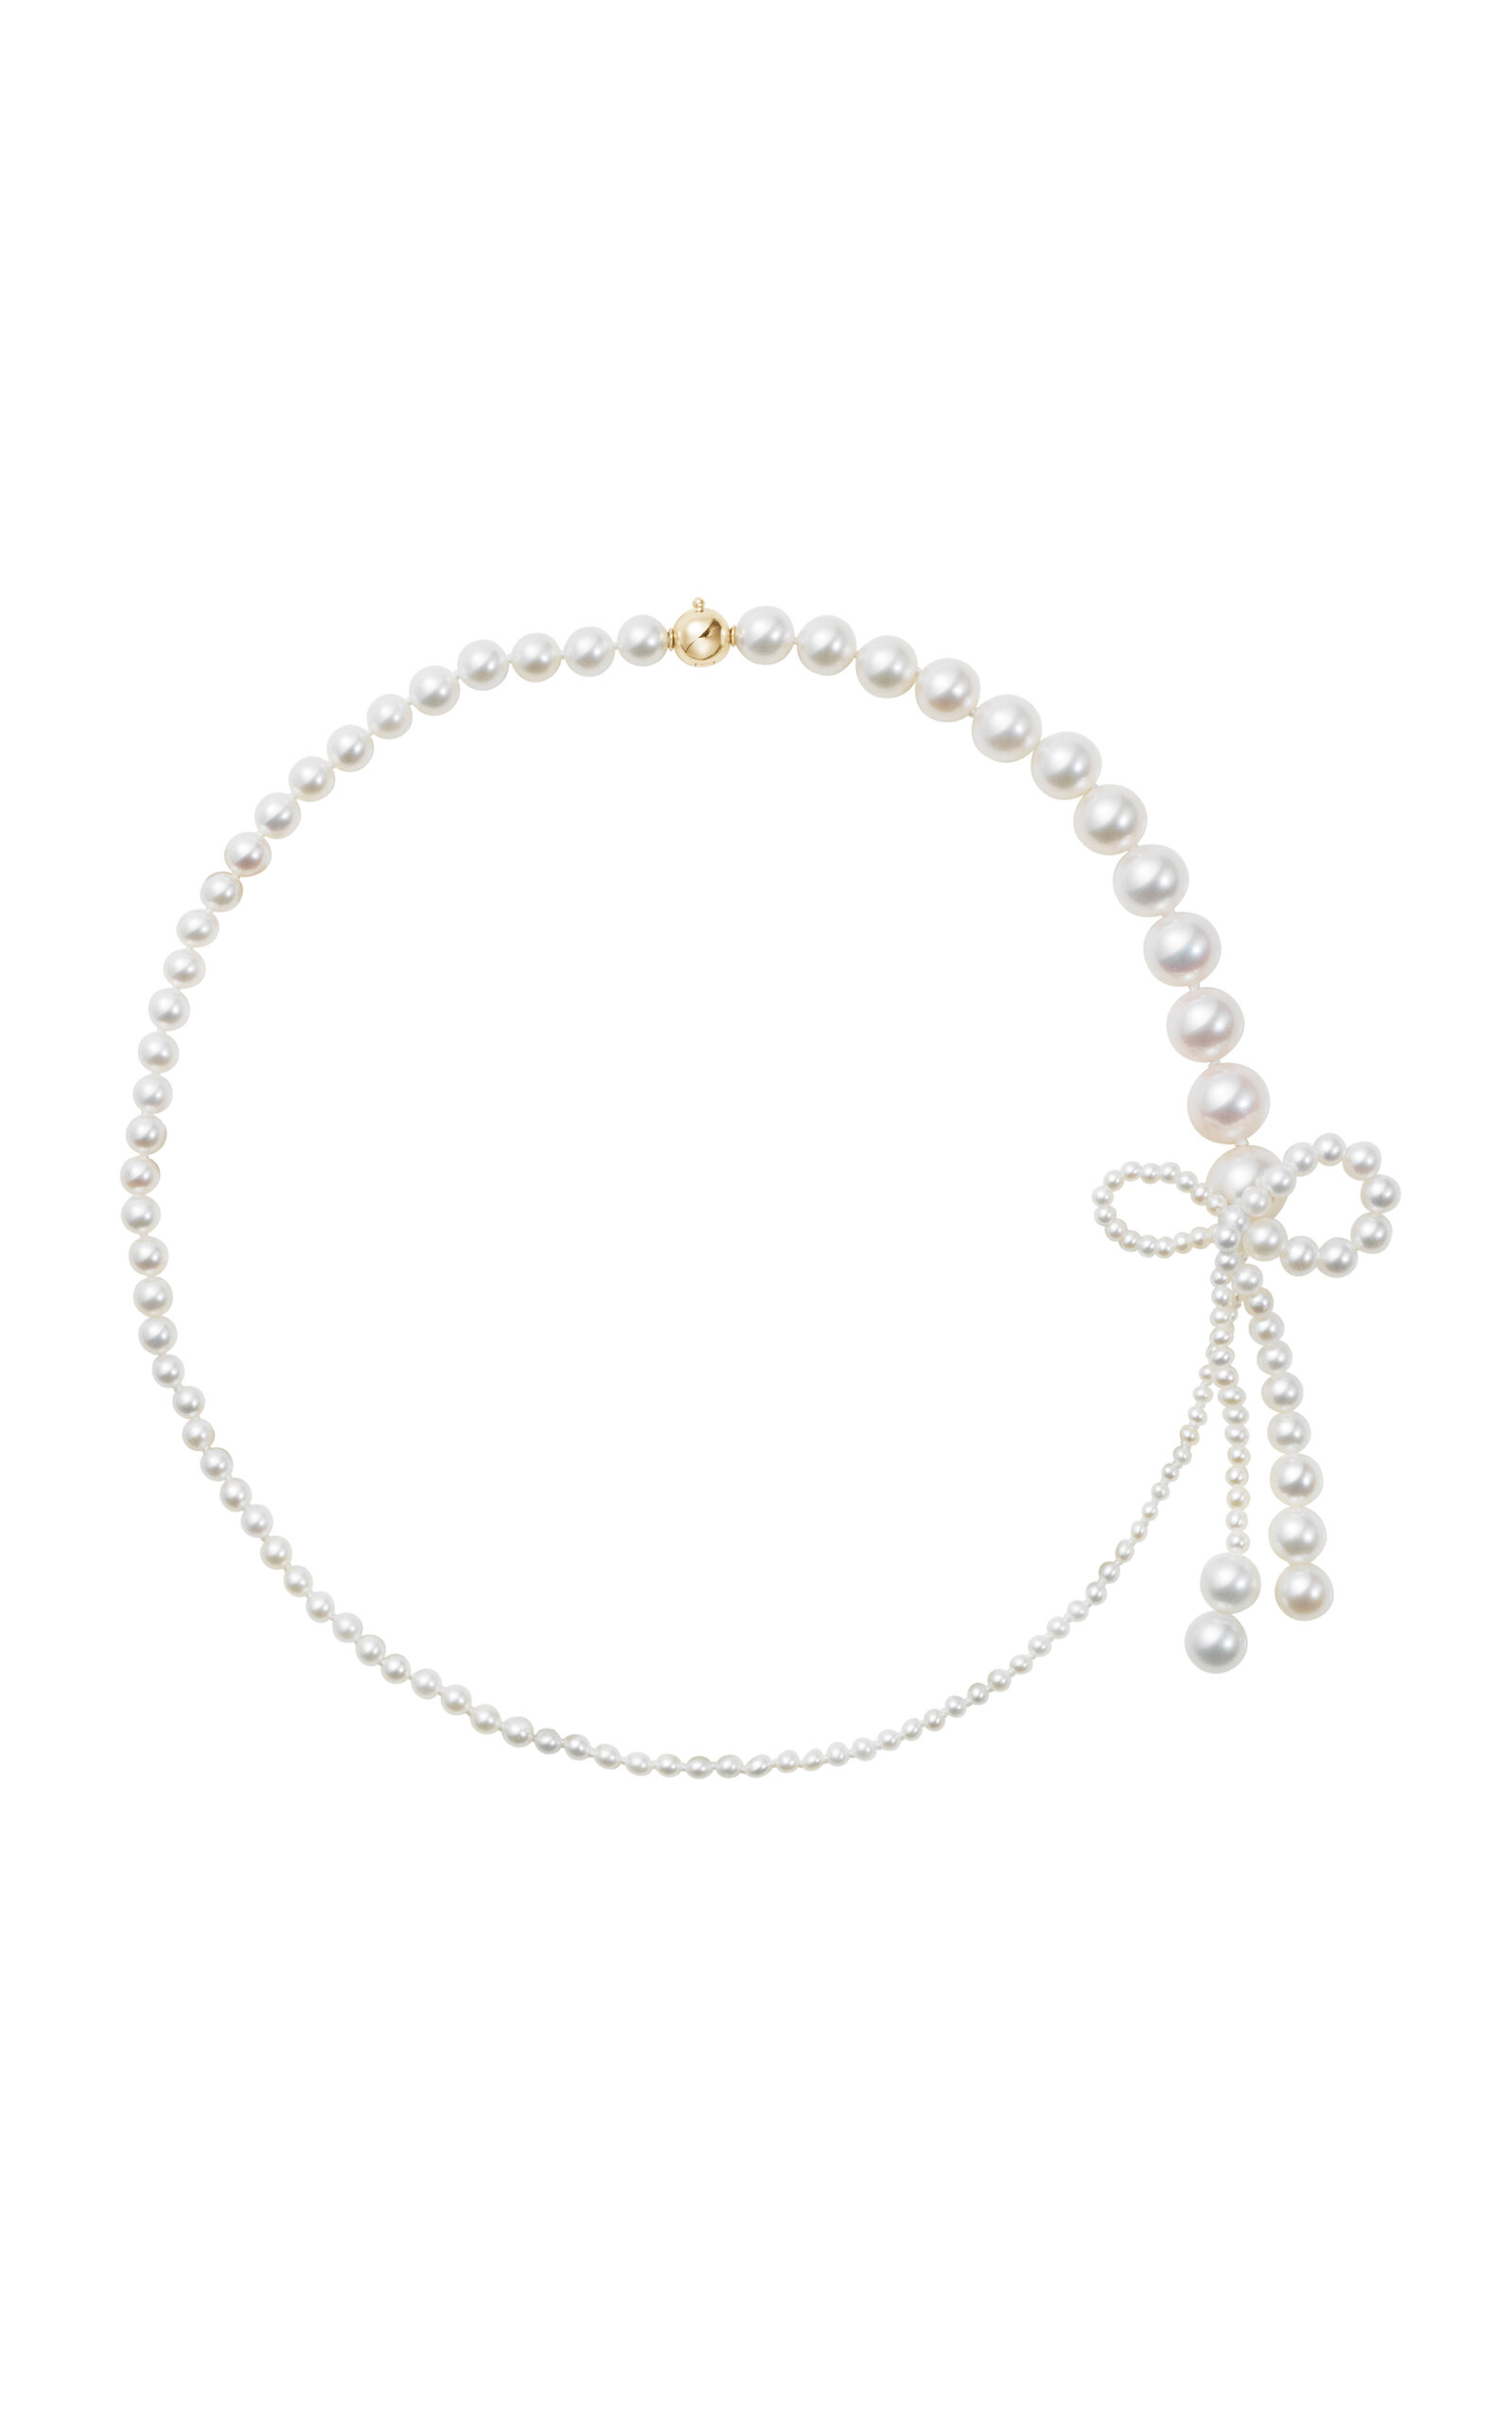 Peggy Rosette 14K Yellow Gold Pearl Necklace